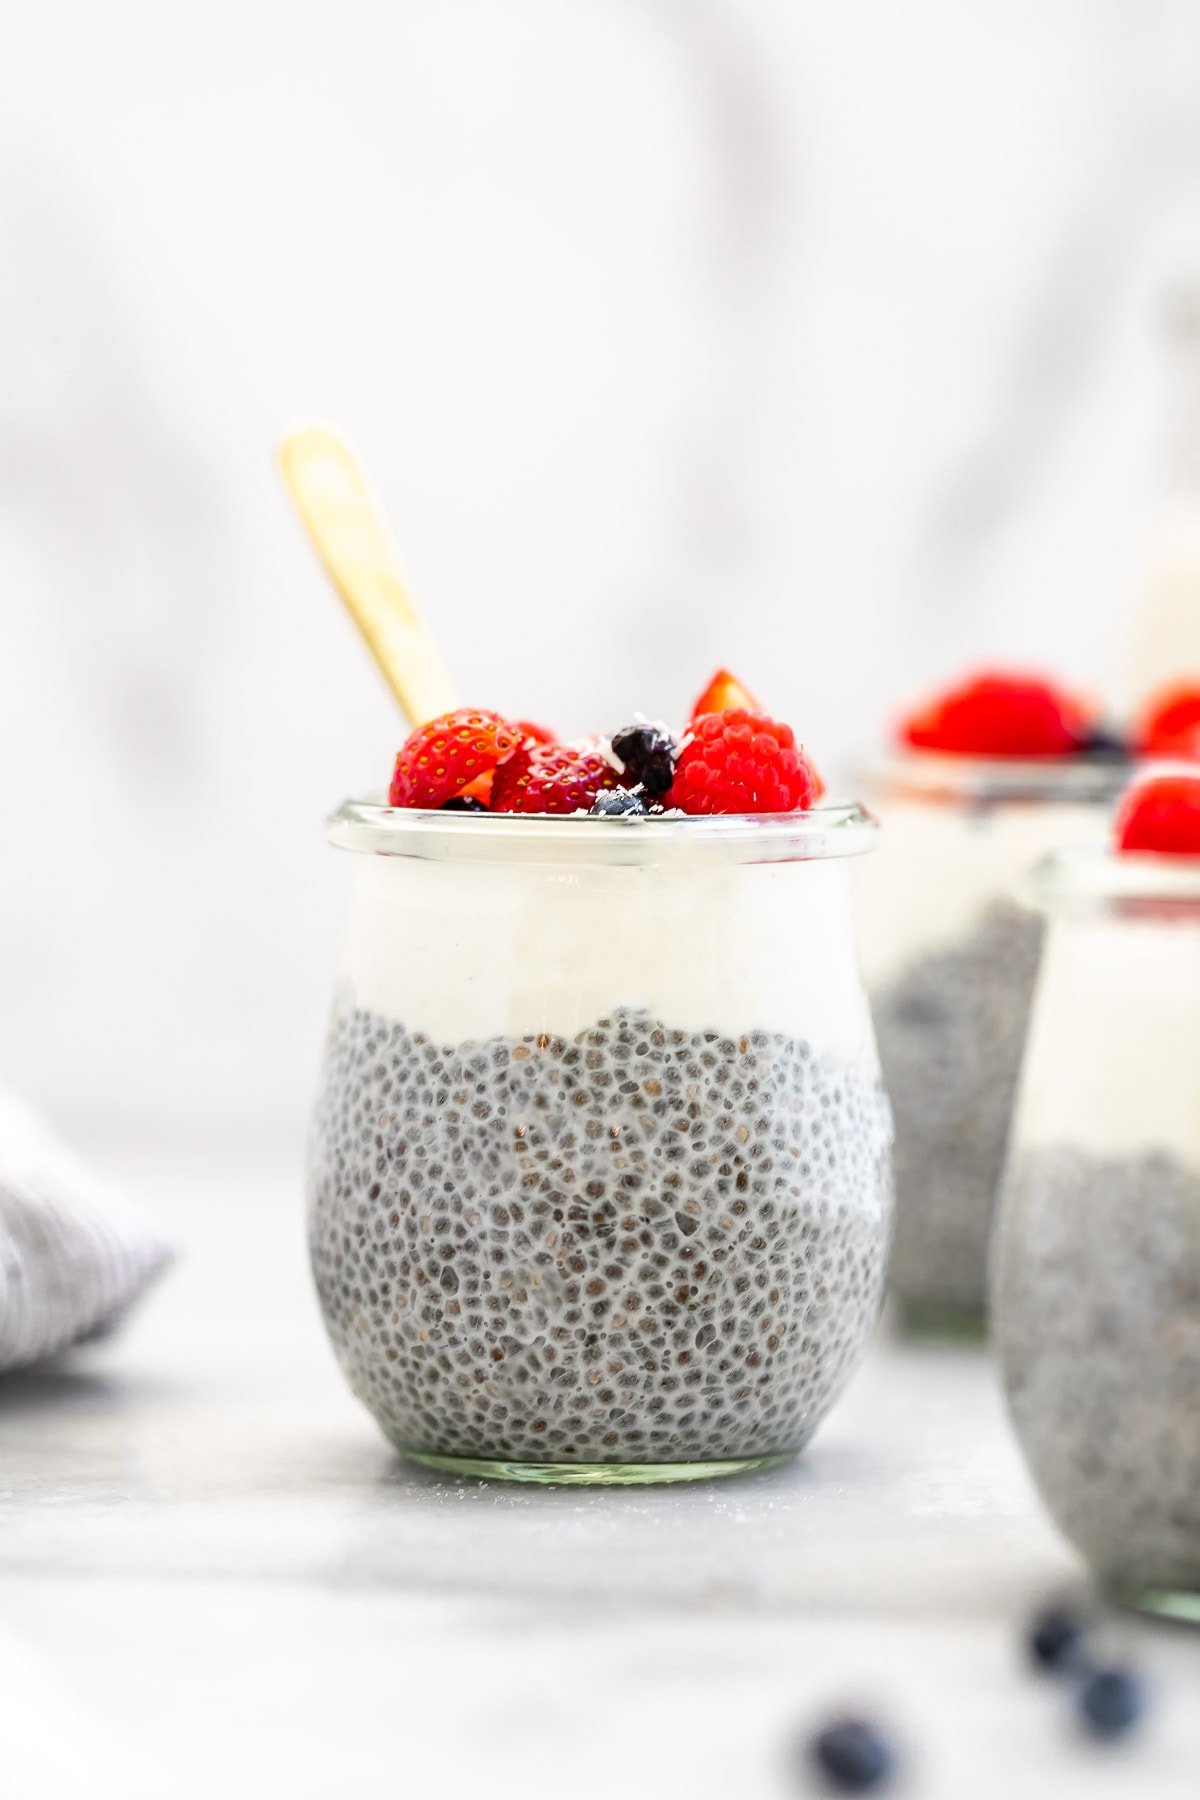 Up close image of the final chia pudding with berries.